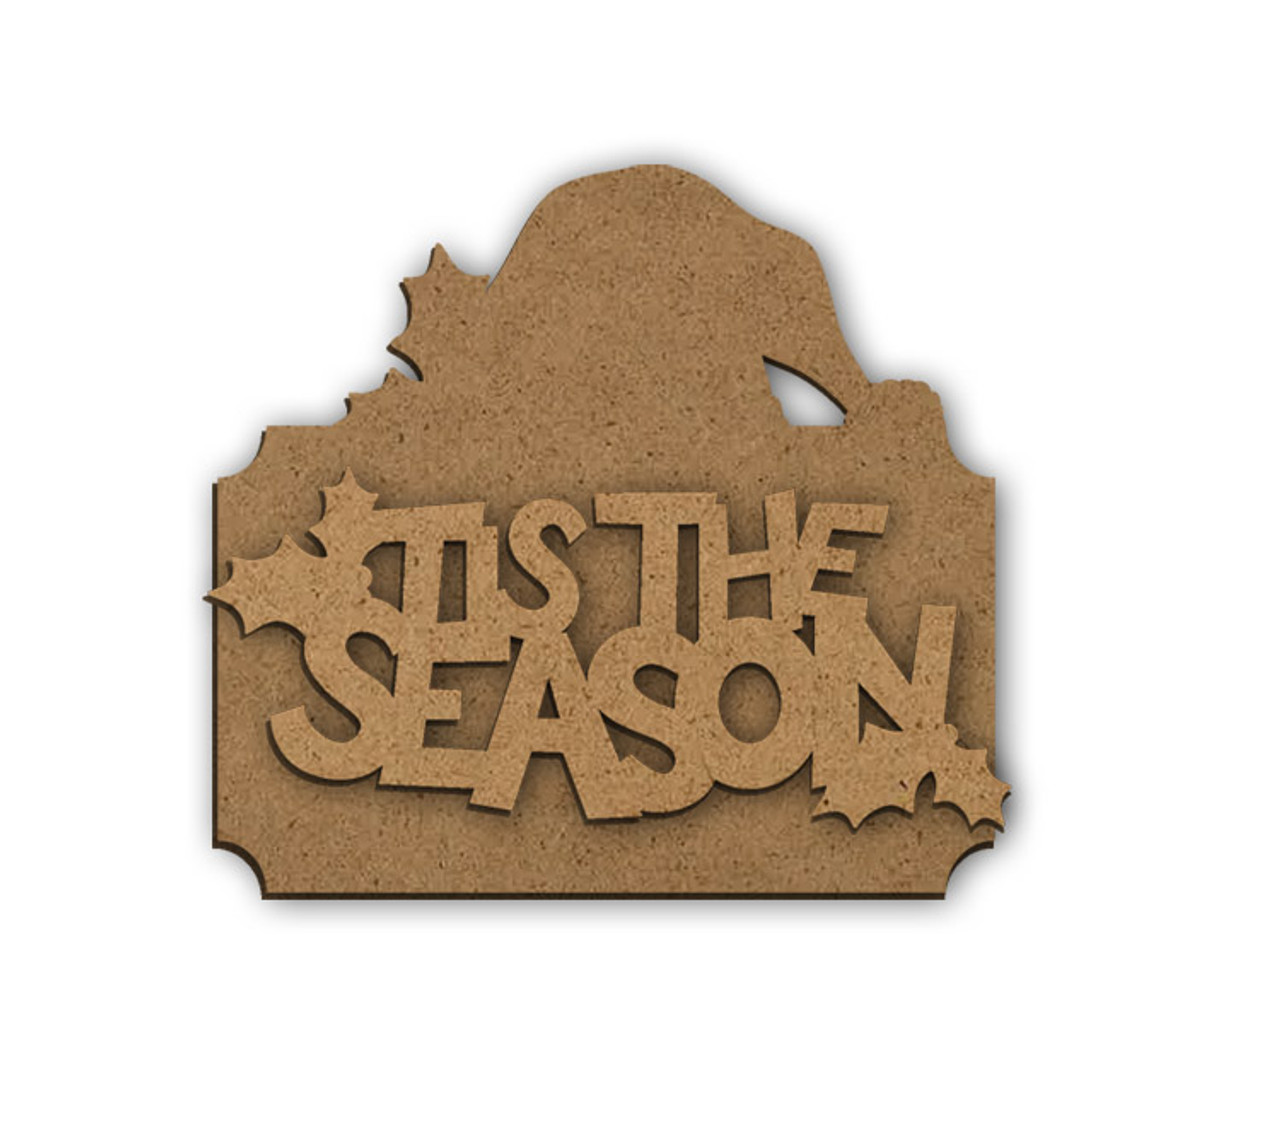 Tis the Season Multipart Word Surface - Ornament - 4 1/8" x 3 1/2"